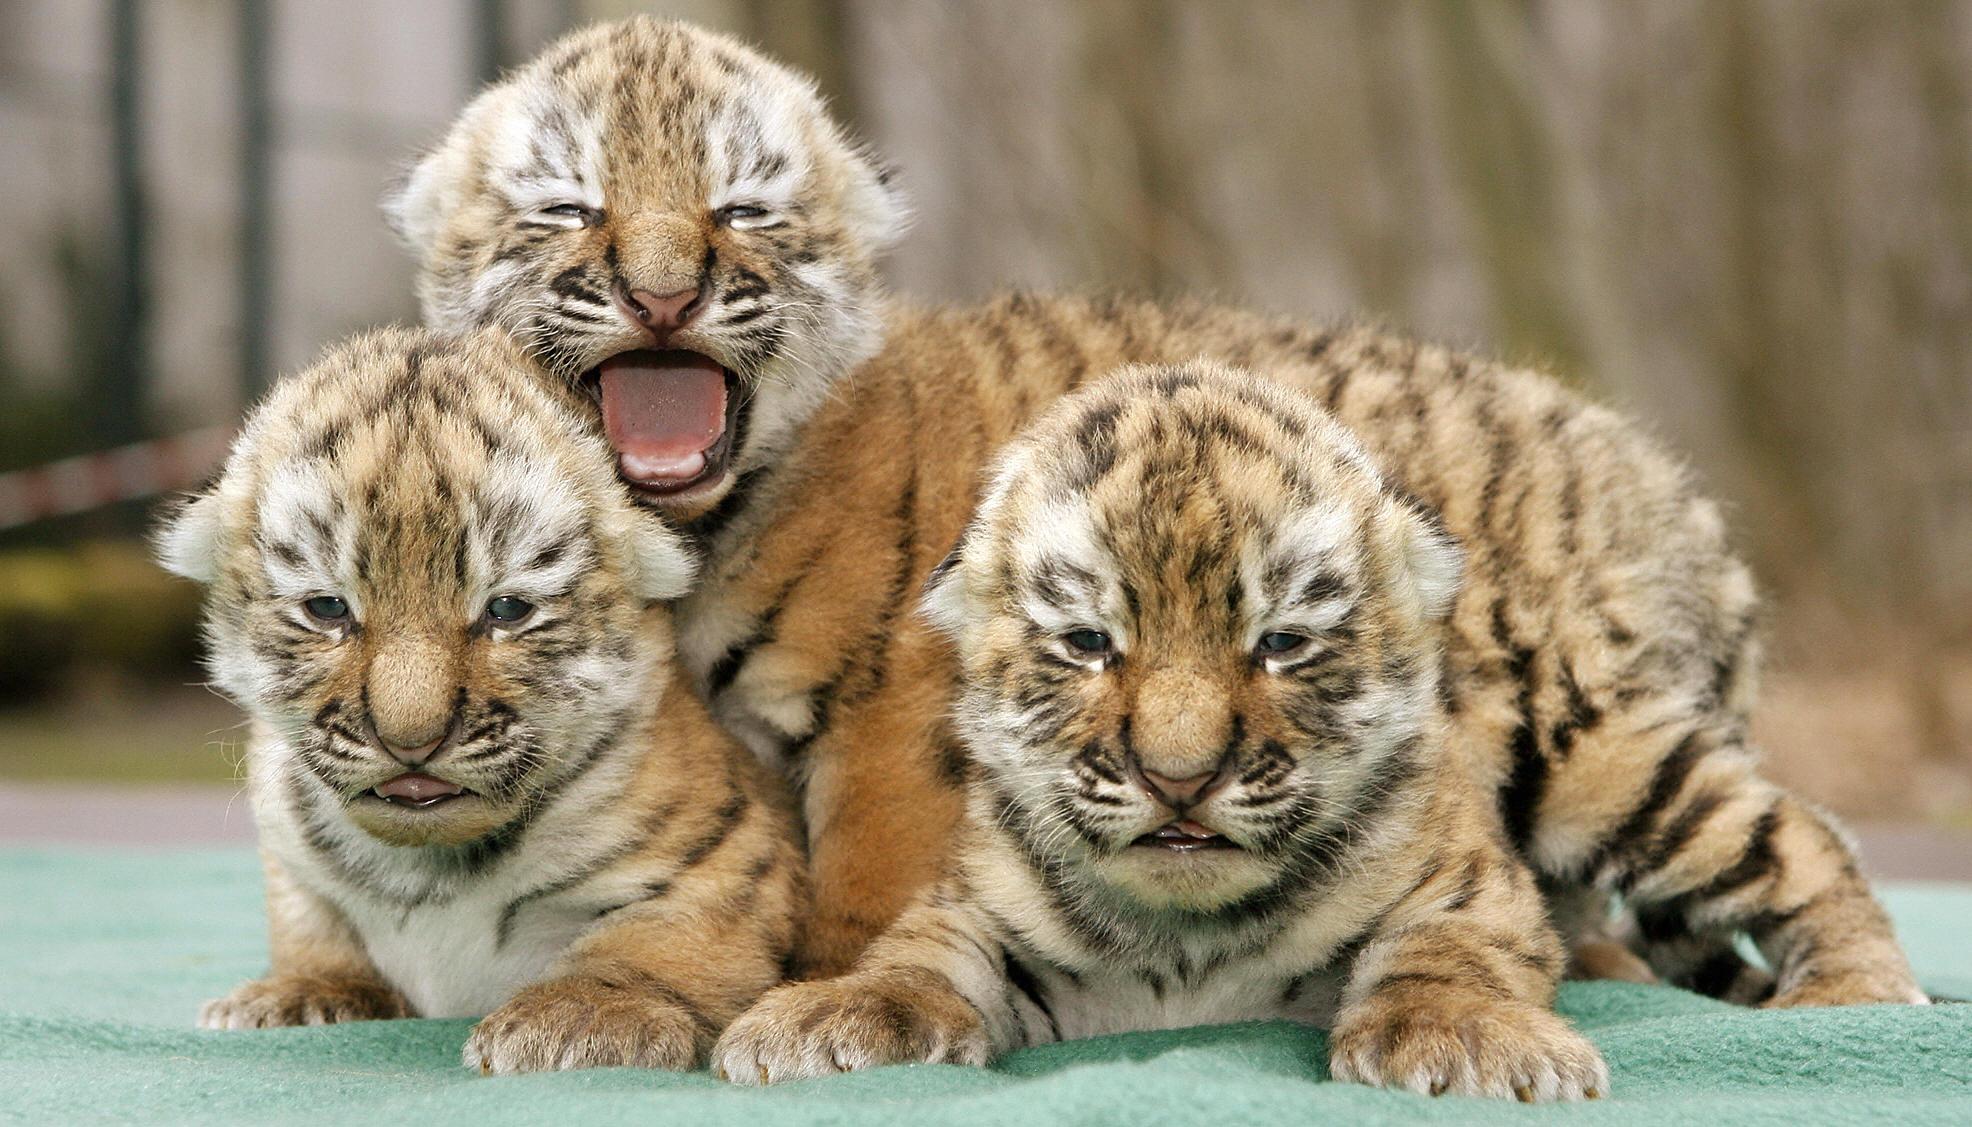 Baby tiger picture